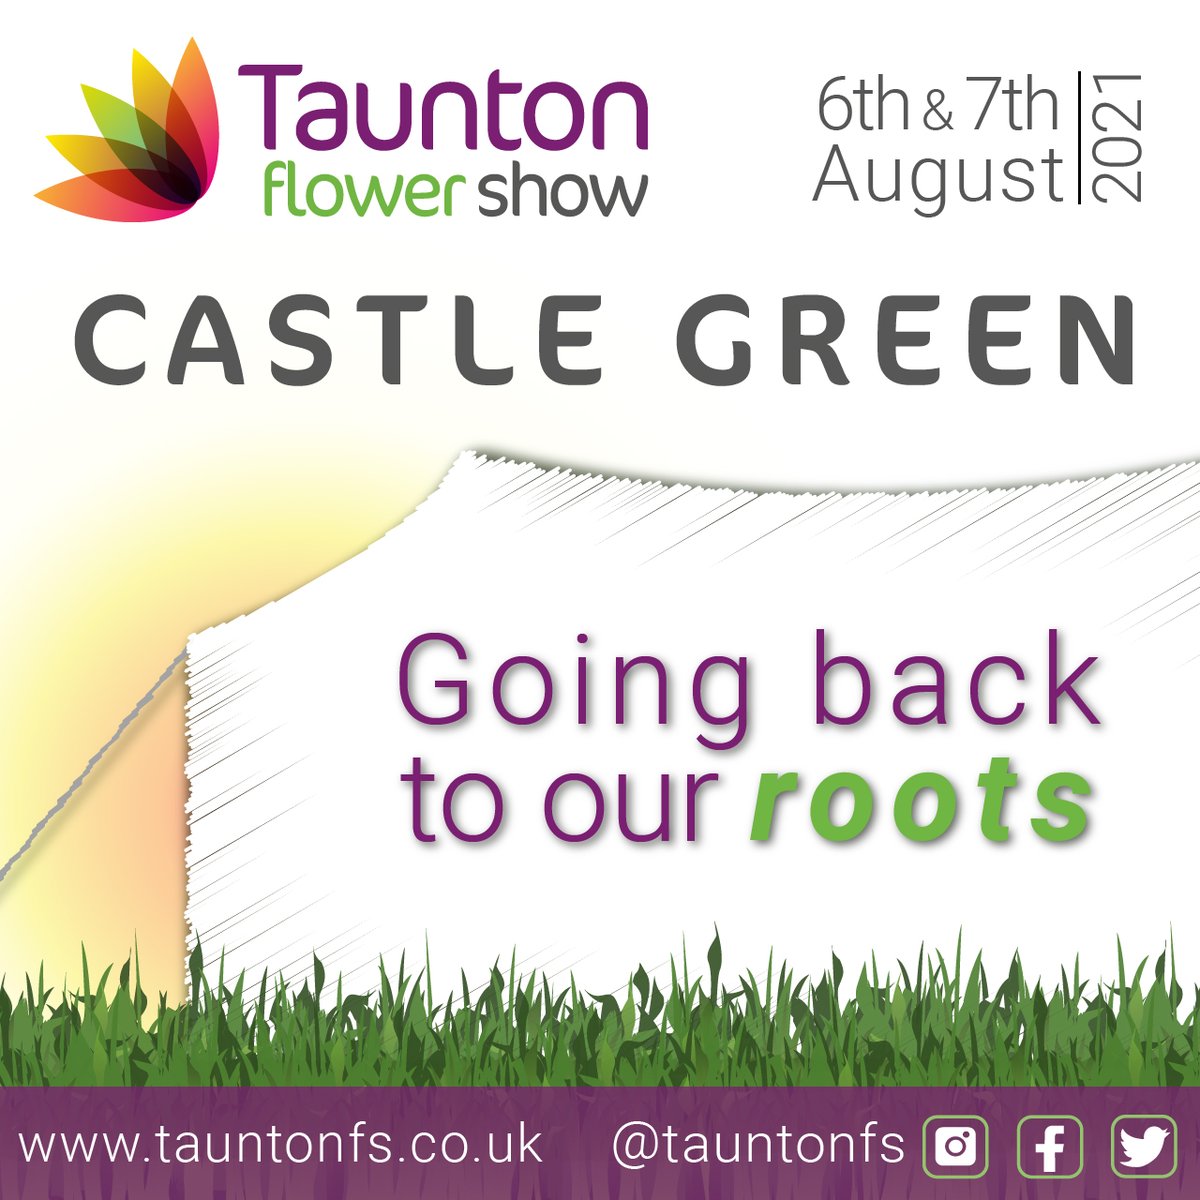 Add our FREE event to your calendar this summer 🌞
📅6th and 7th August 2021
📍Castle Green, Taunton, Somerset
🌷🌱🌳🧤 🛒All things horticulture

#TFS2021 #TauntonFlowerShow #Somerset #Taunton #CastleGreen #Horticulture #gardening #gardenshow #GoingBackToOurRoots